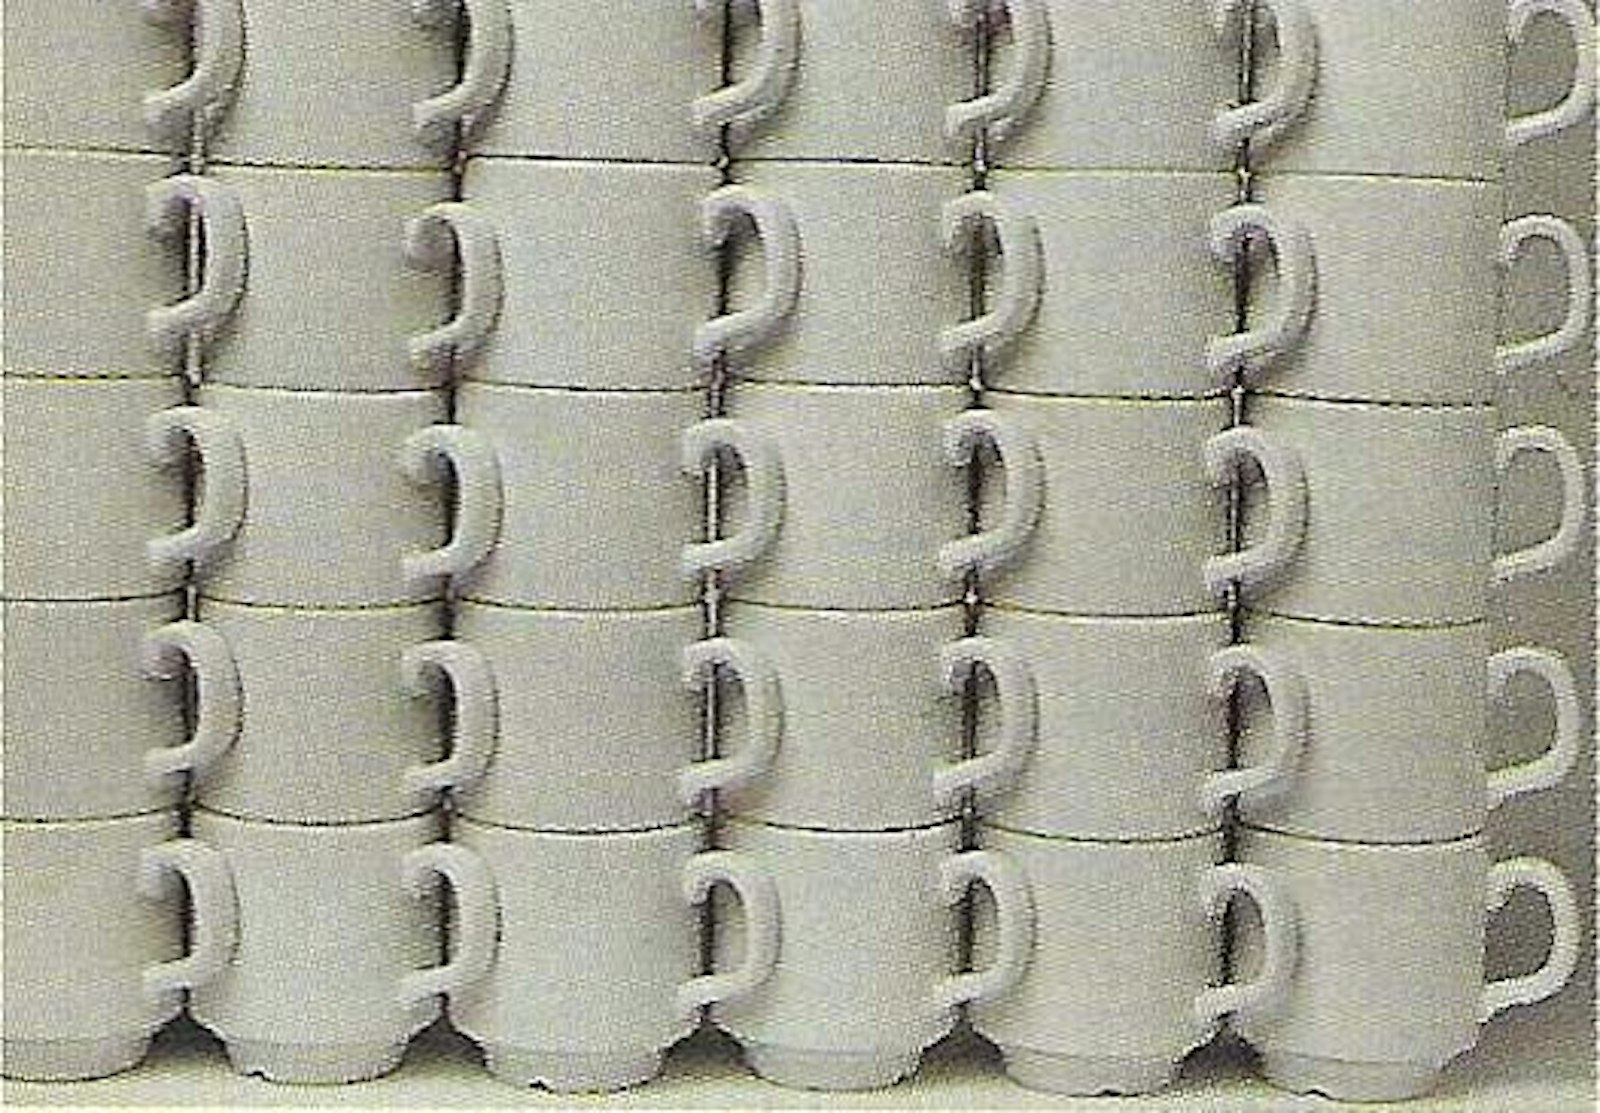 The stackable coffe cup 'Sonja', 1967, of which 30 million copies were manufactured.